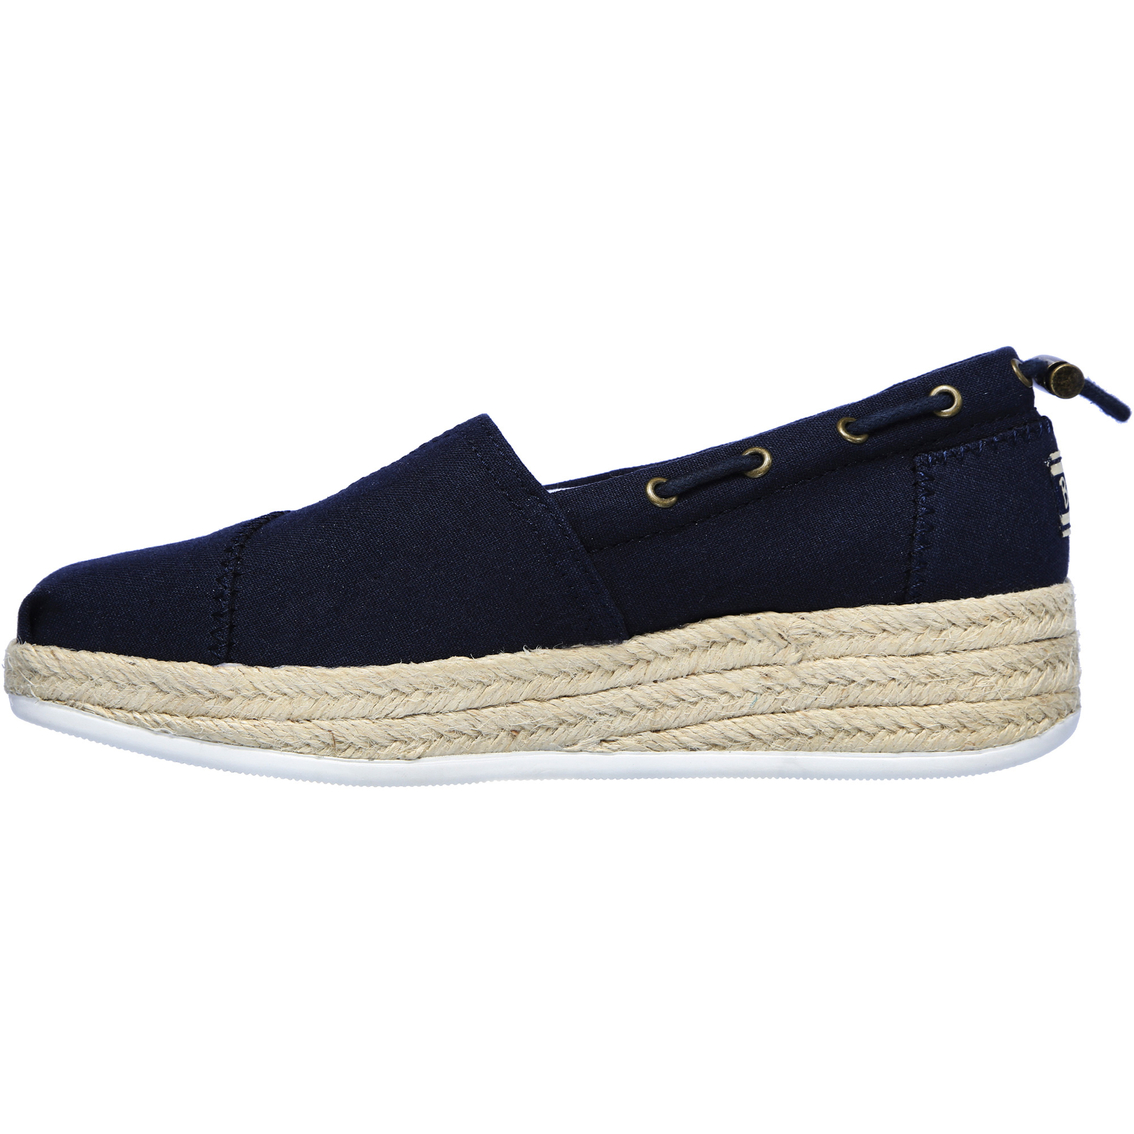 Bobs From Skechers Highlights 2.0 Yacht Master Shoes | Flats | Shoes ...